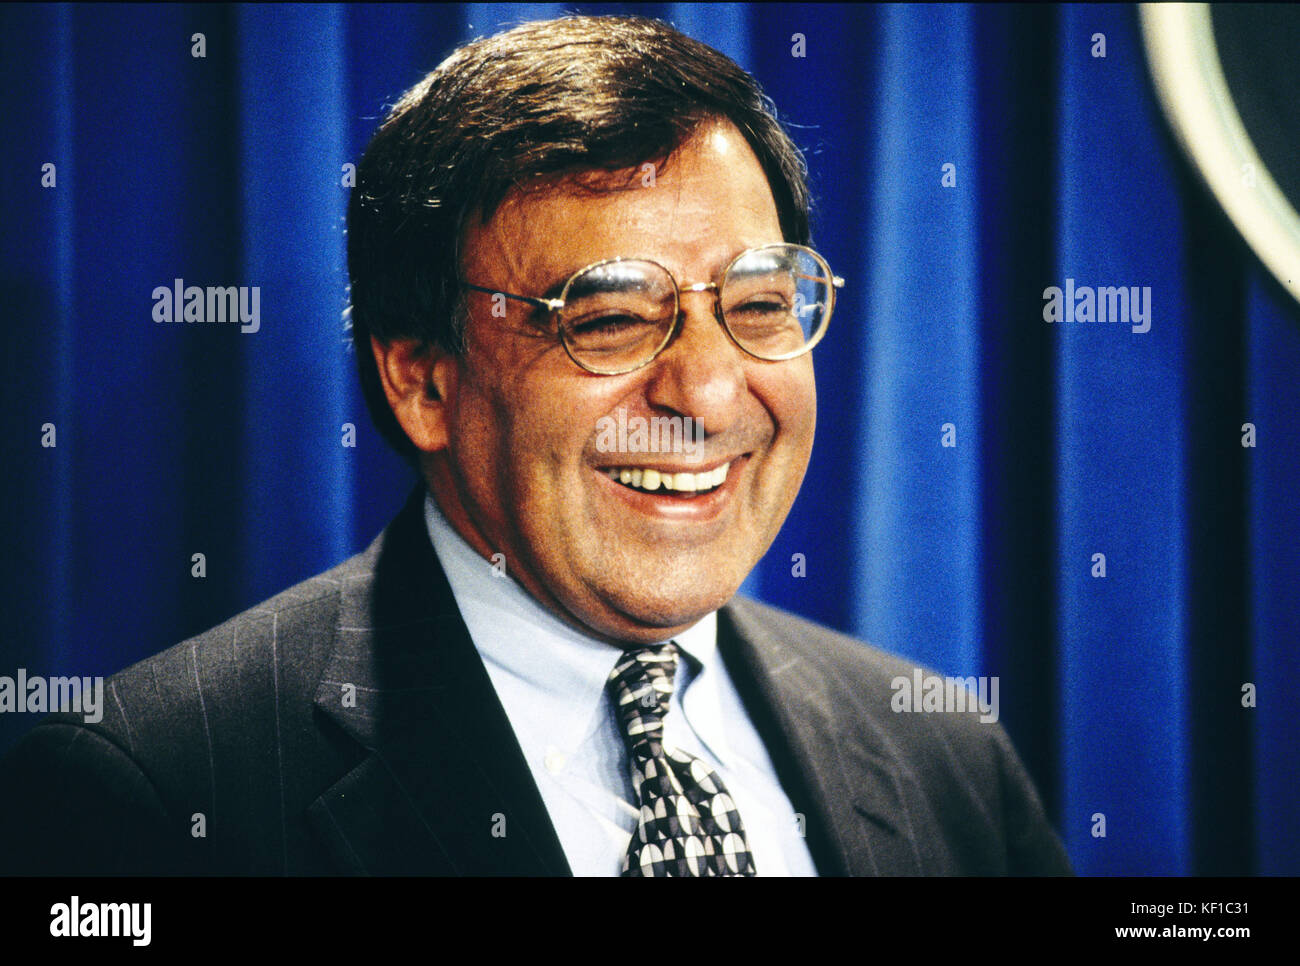 White House Chief of Staff Leon Panetta meets reporters in the Brady Press Briefing Room of the White House in Washington, DC on January 5, 1995. Credit: Ron Sachs/CNP - NO WIRE SERVICE - Photo: Ron Sachs/Consolidated News Photos/Ron Sachs - CNP Stock Photo